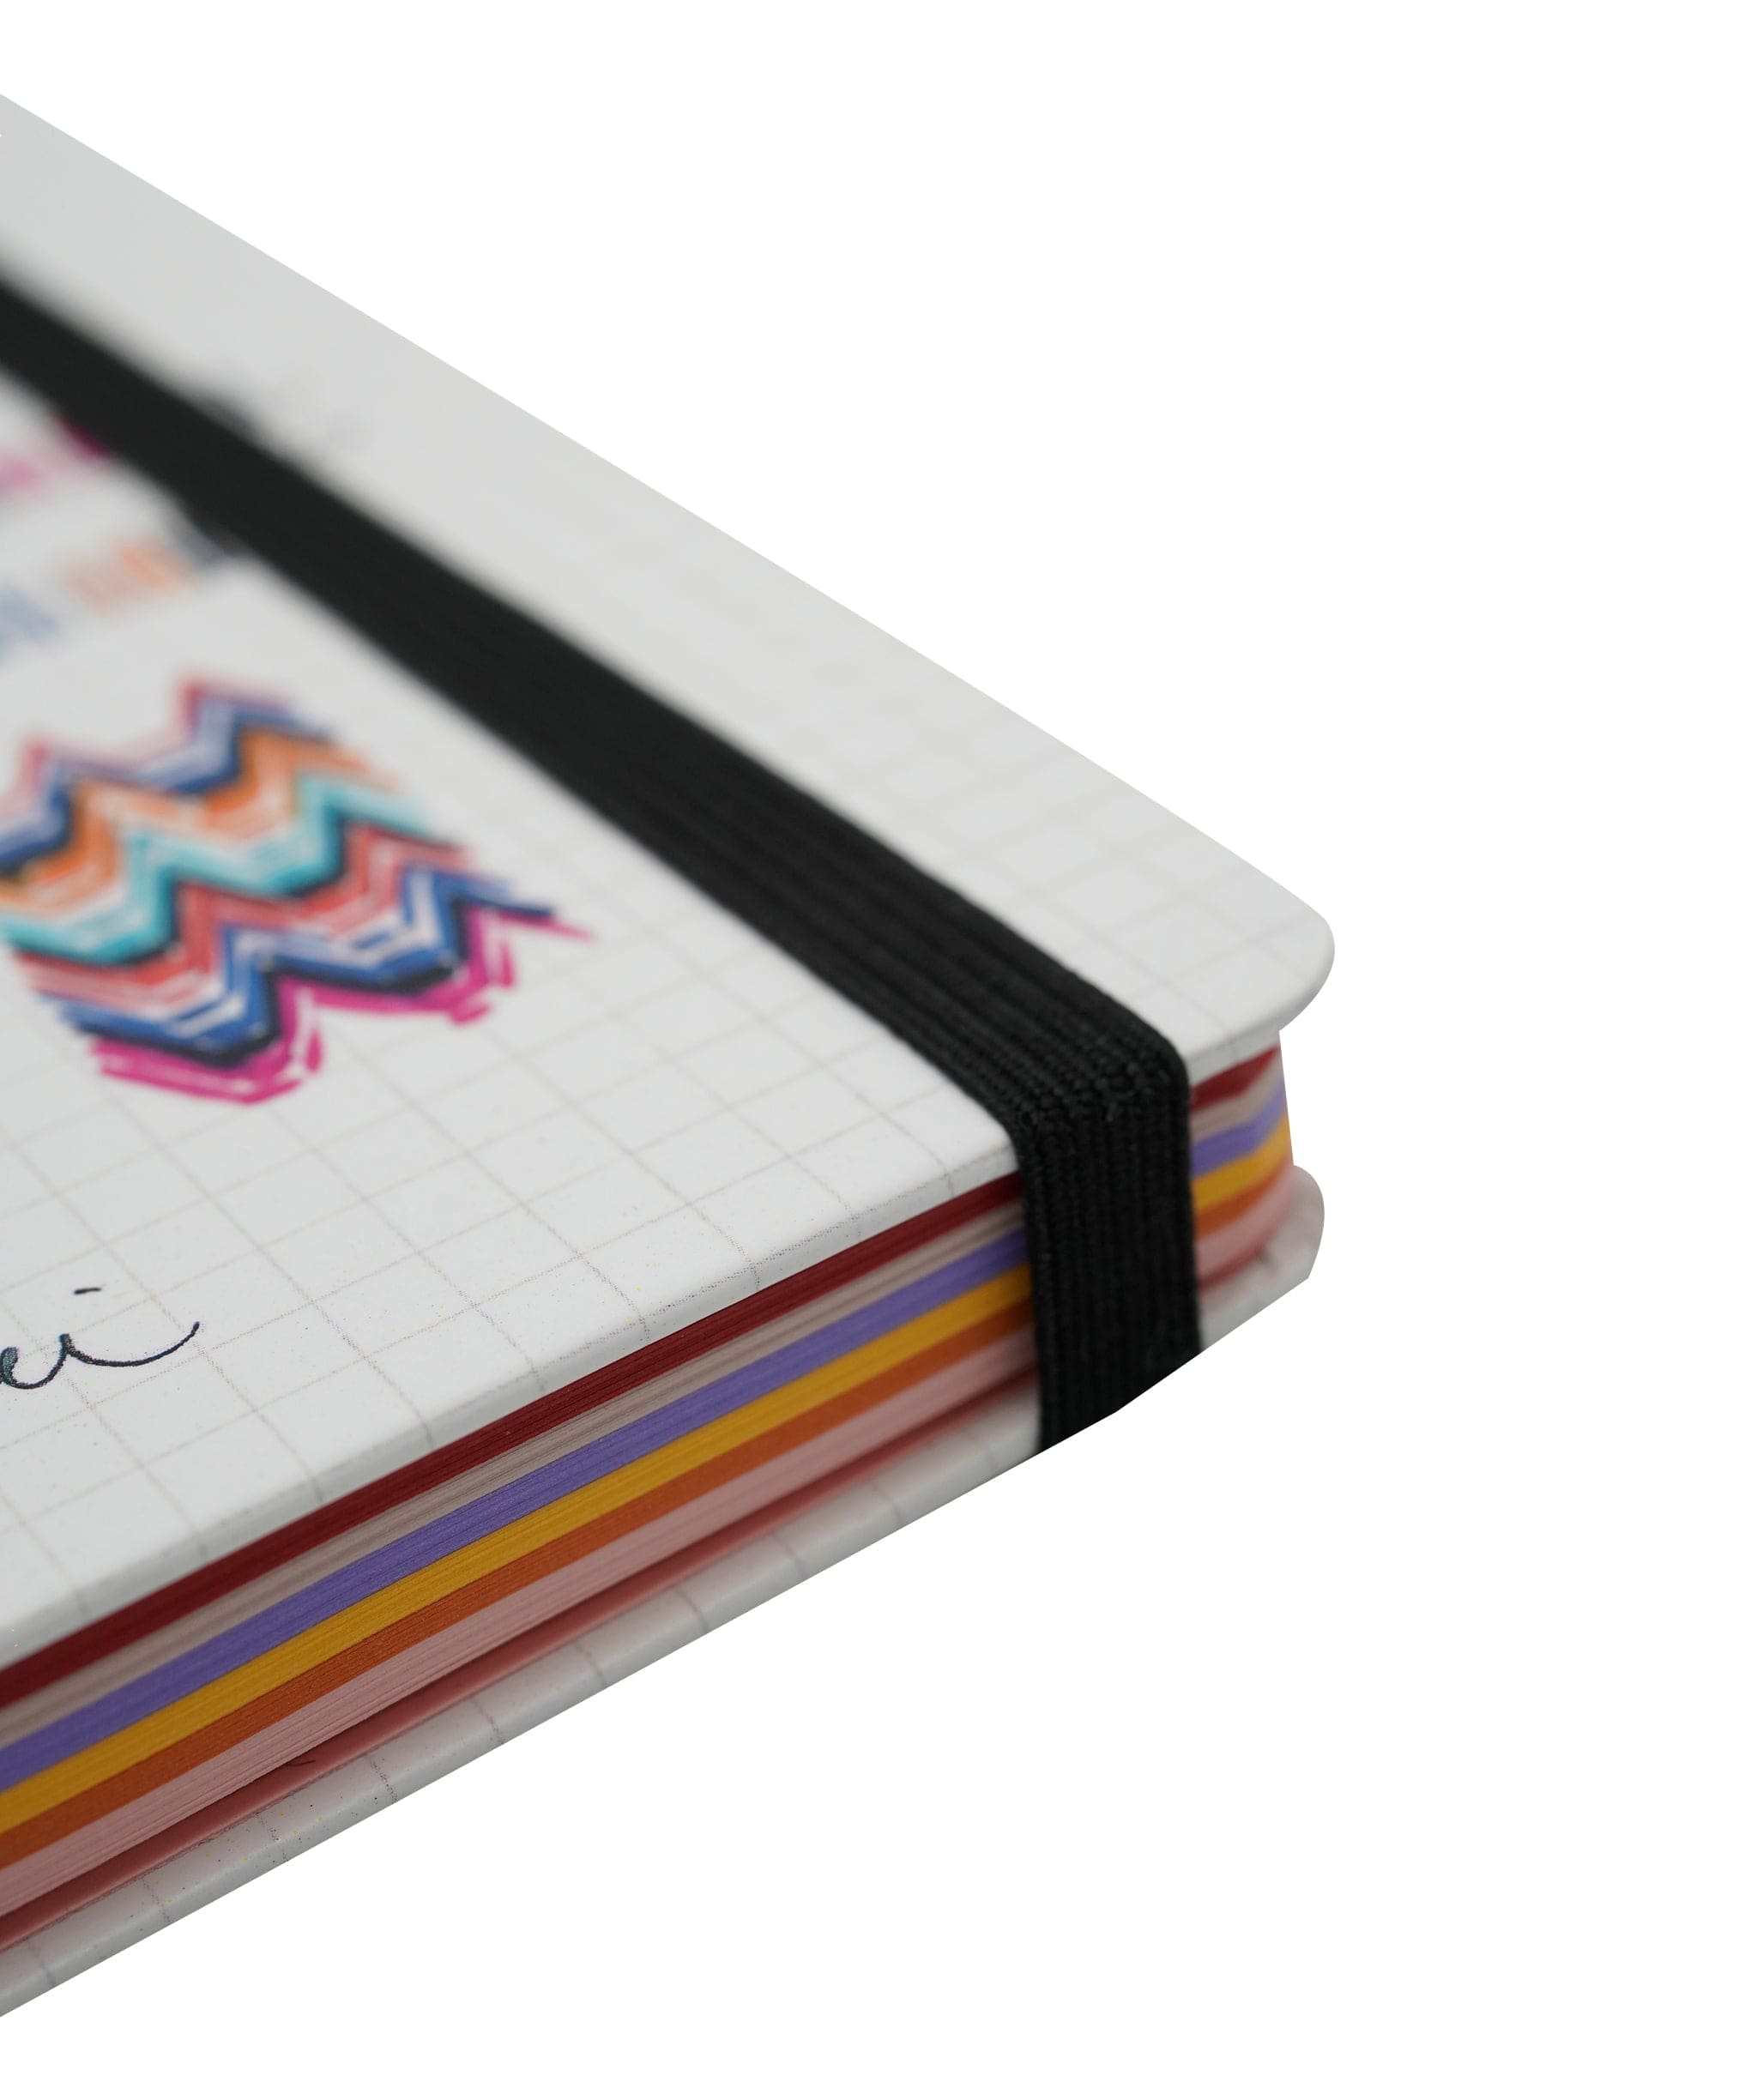 Missoni * NEEDS IMAGES AND DESCR. Missoni Notebook Colourful pages ASL9906